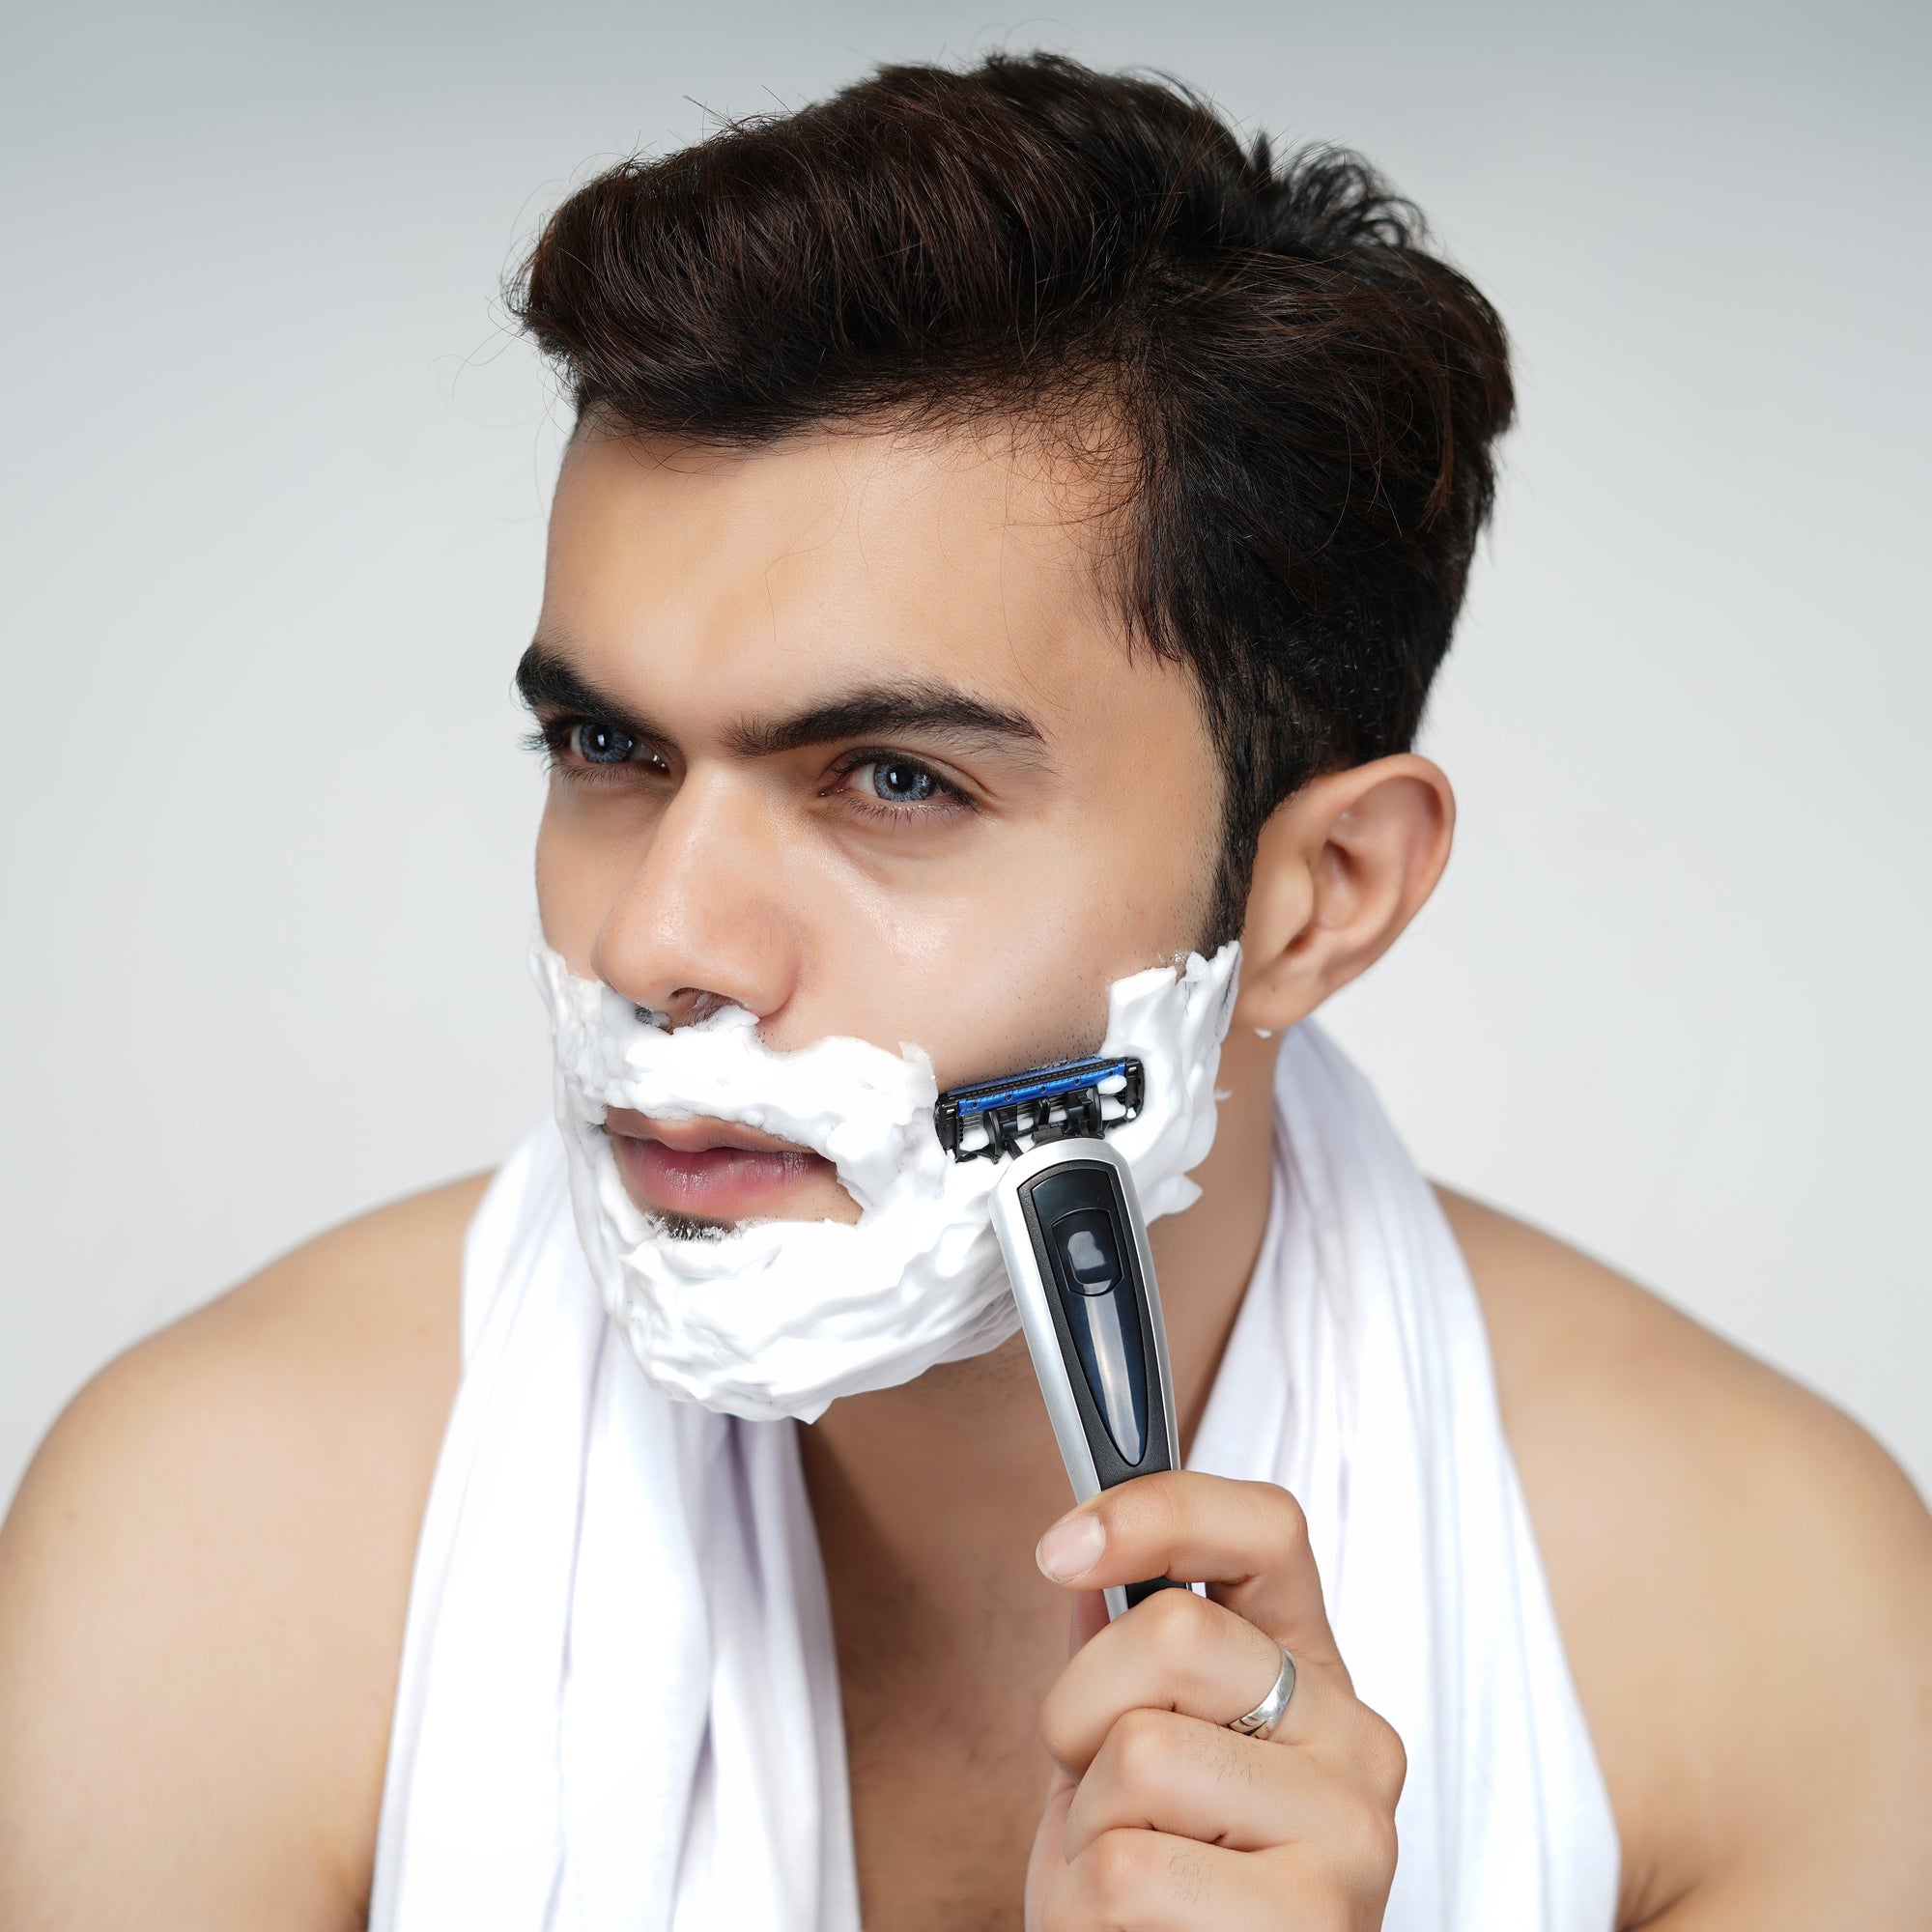 Shaving 101: Step by Step Guide for that perfect shave